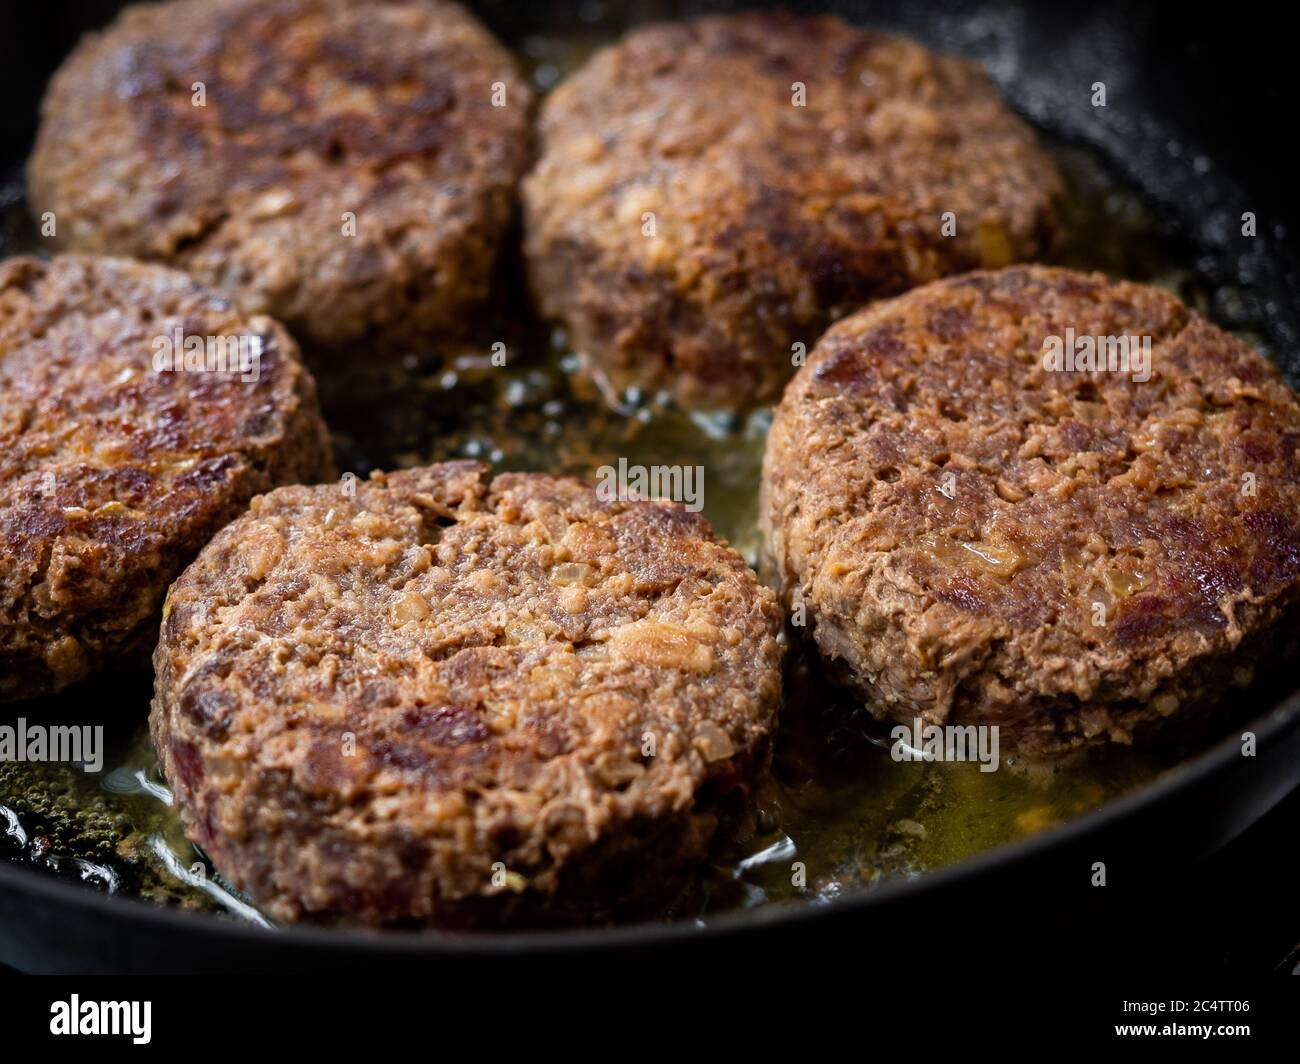 Beef burgers fried in frying pan. Close-up homemade juicy minced meat patties burgers in iron frying pan. Stock Photo